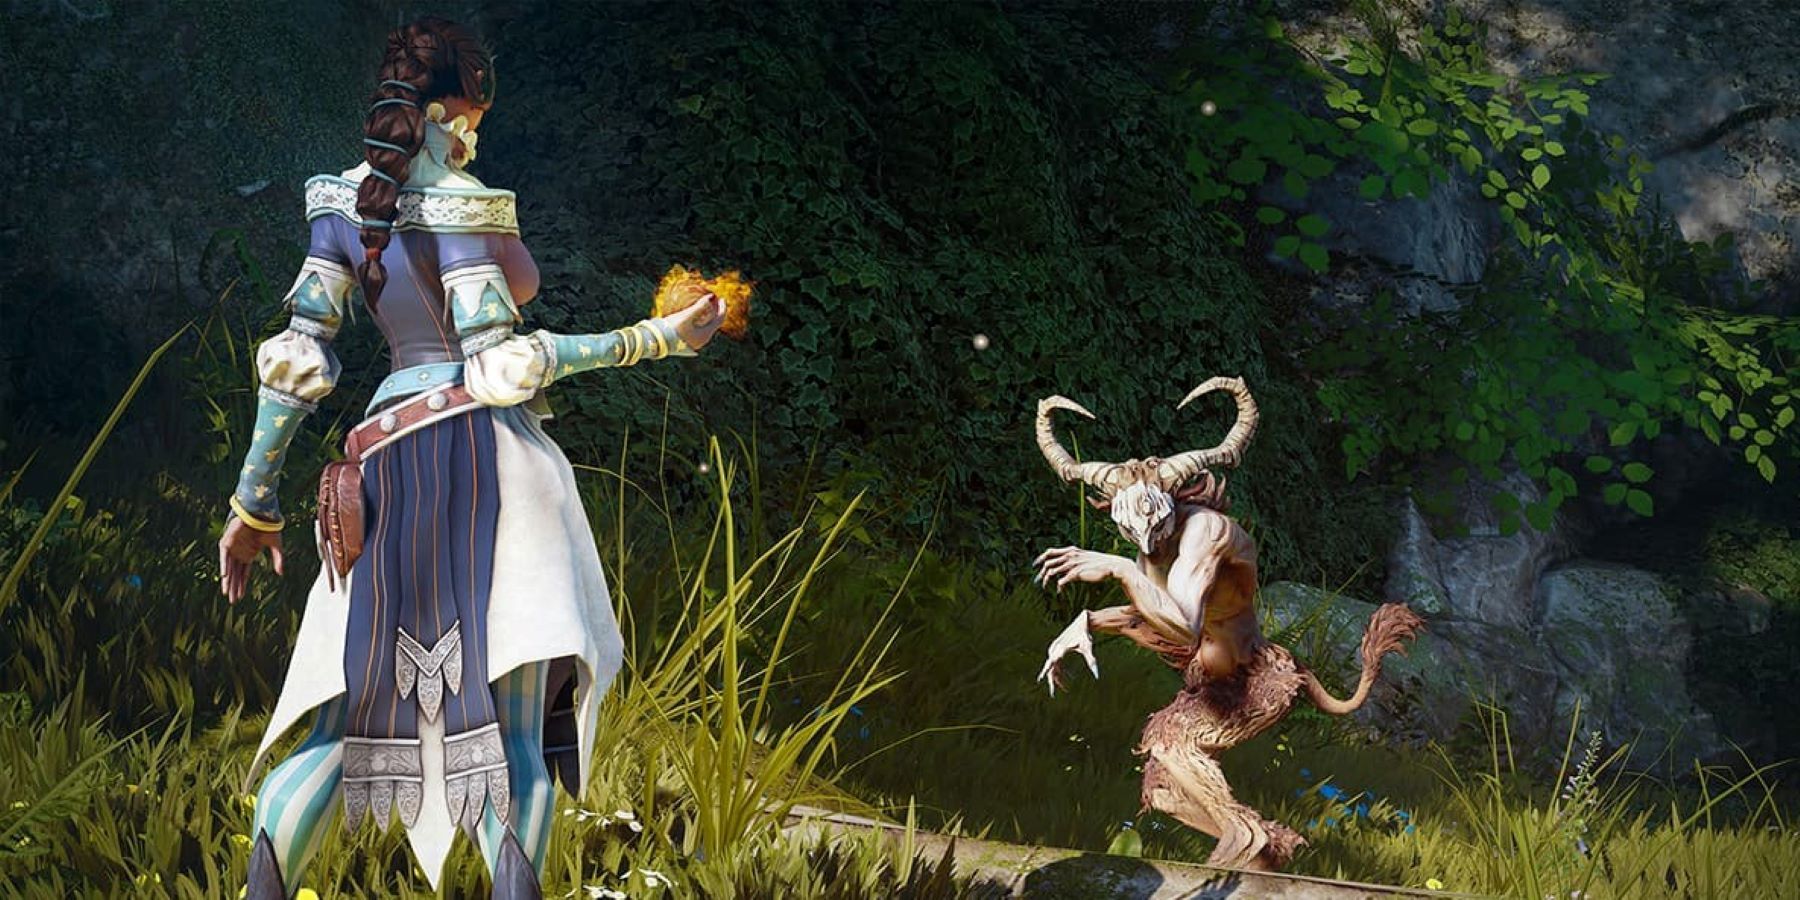 A finely dressed woman with magic in hand faces off against a satyr-like creature in Fable Legends